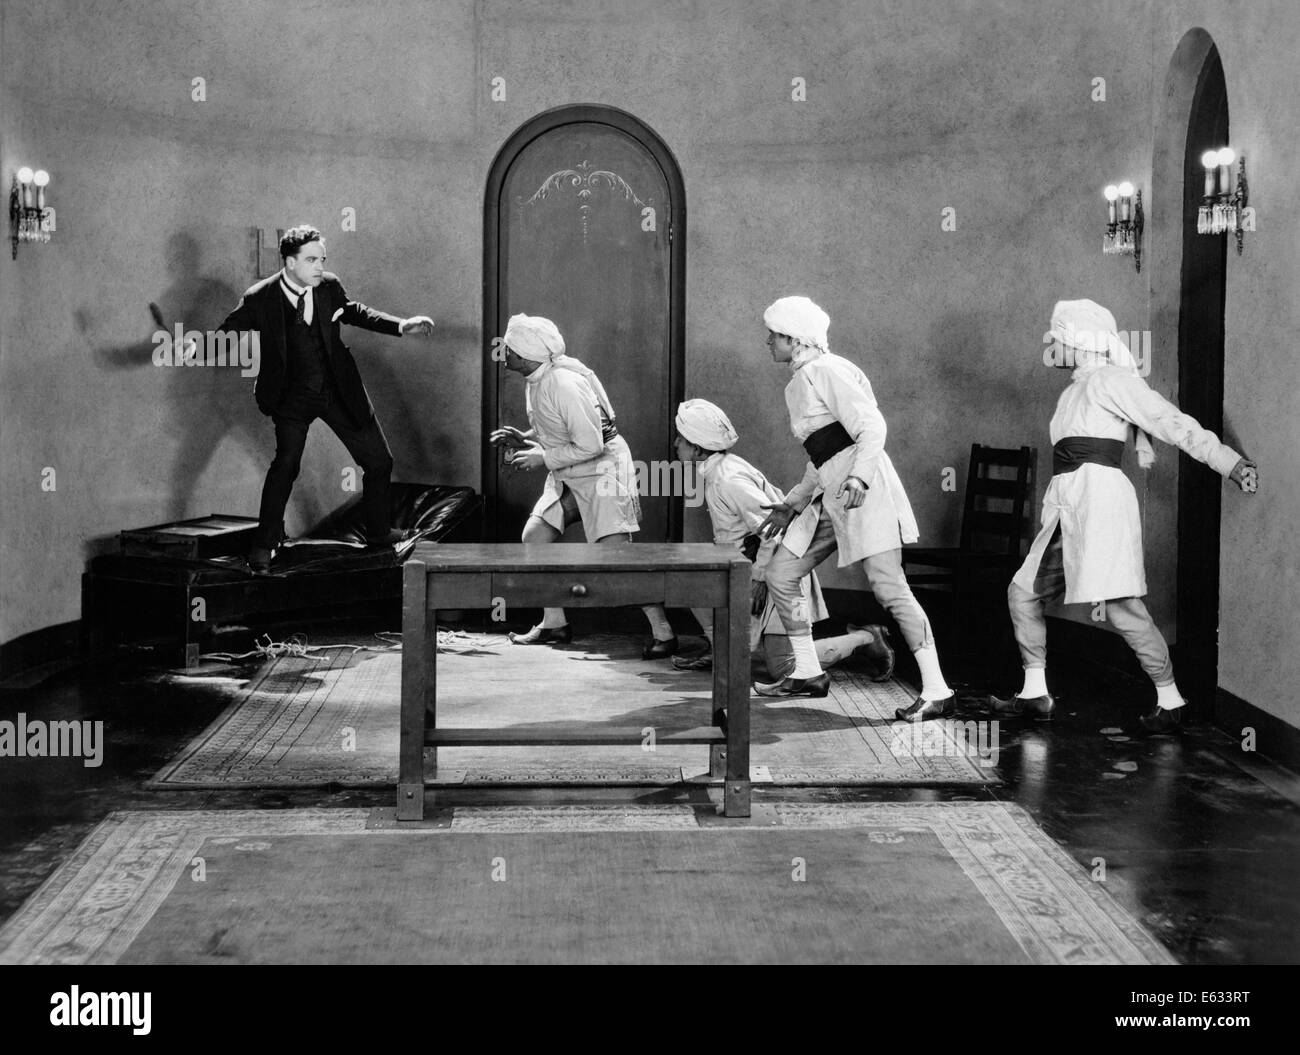 1920s MAN IN SUIT AND TIE BEING CHASED BY GANG OF THUGS WEARING TURBANS SILENT MOVIE STILL Stock Photo